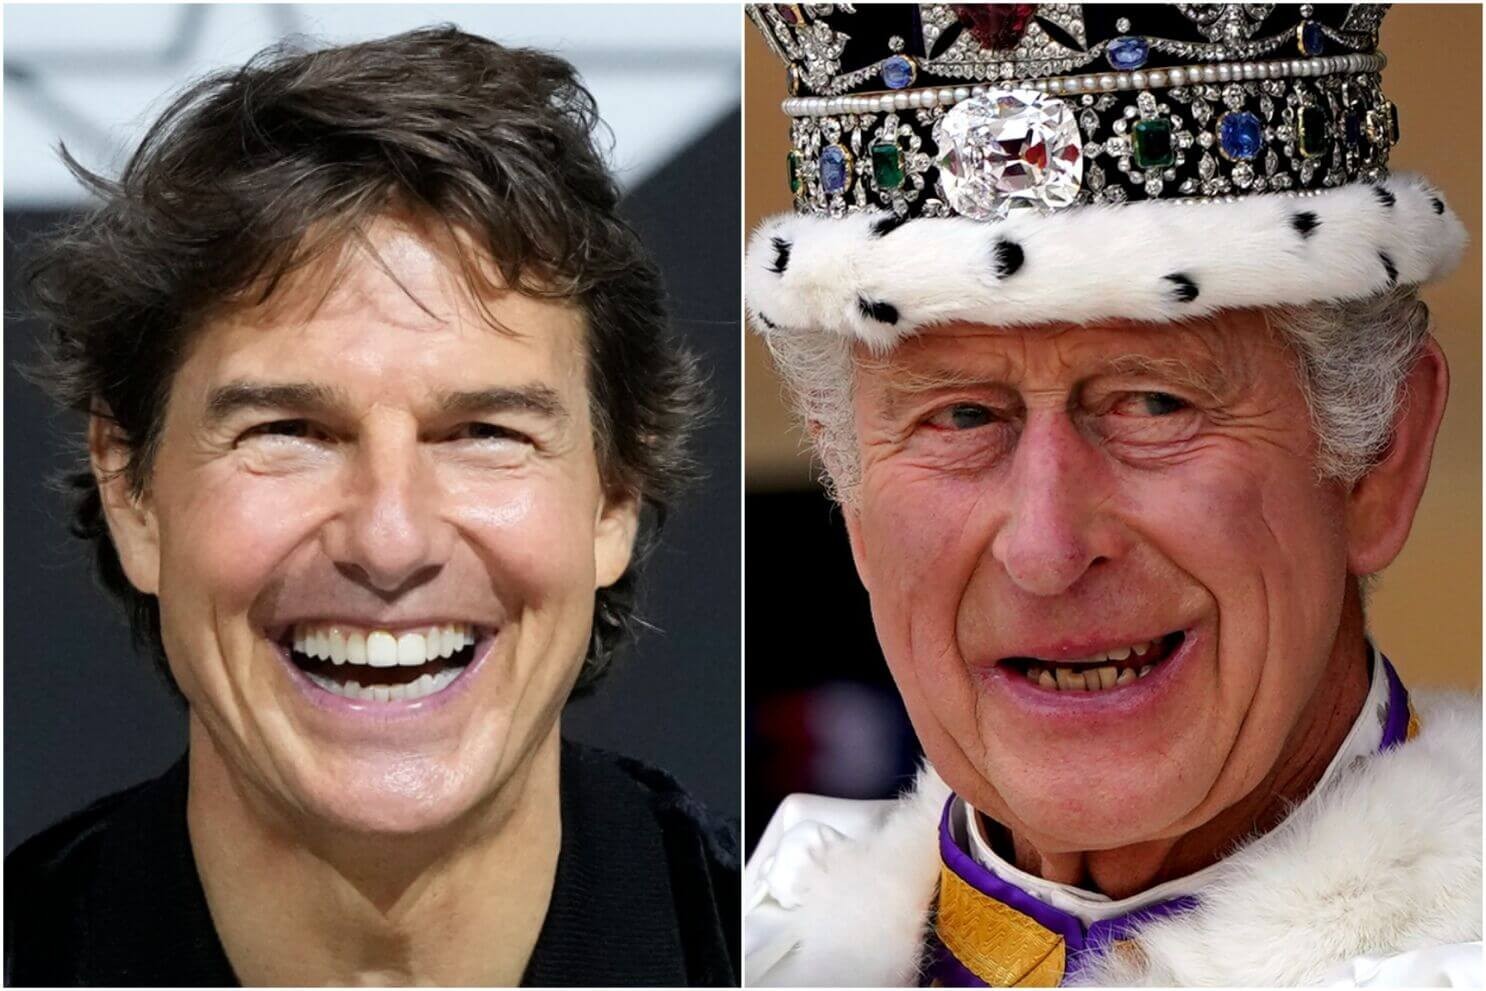 Tom Cruise sent a video message to congratulate King Charles on his coronation